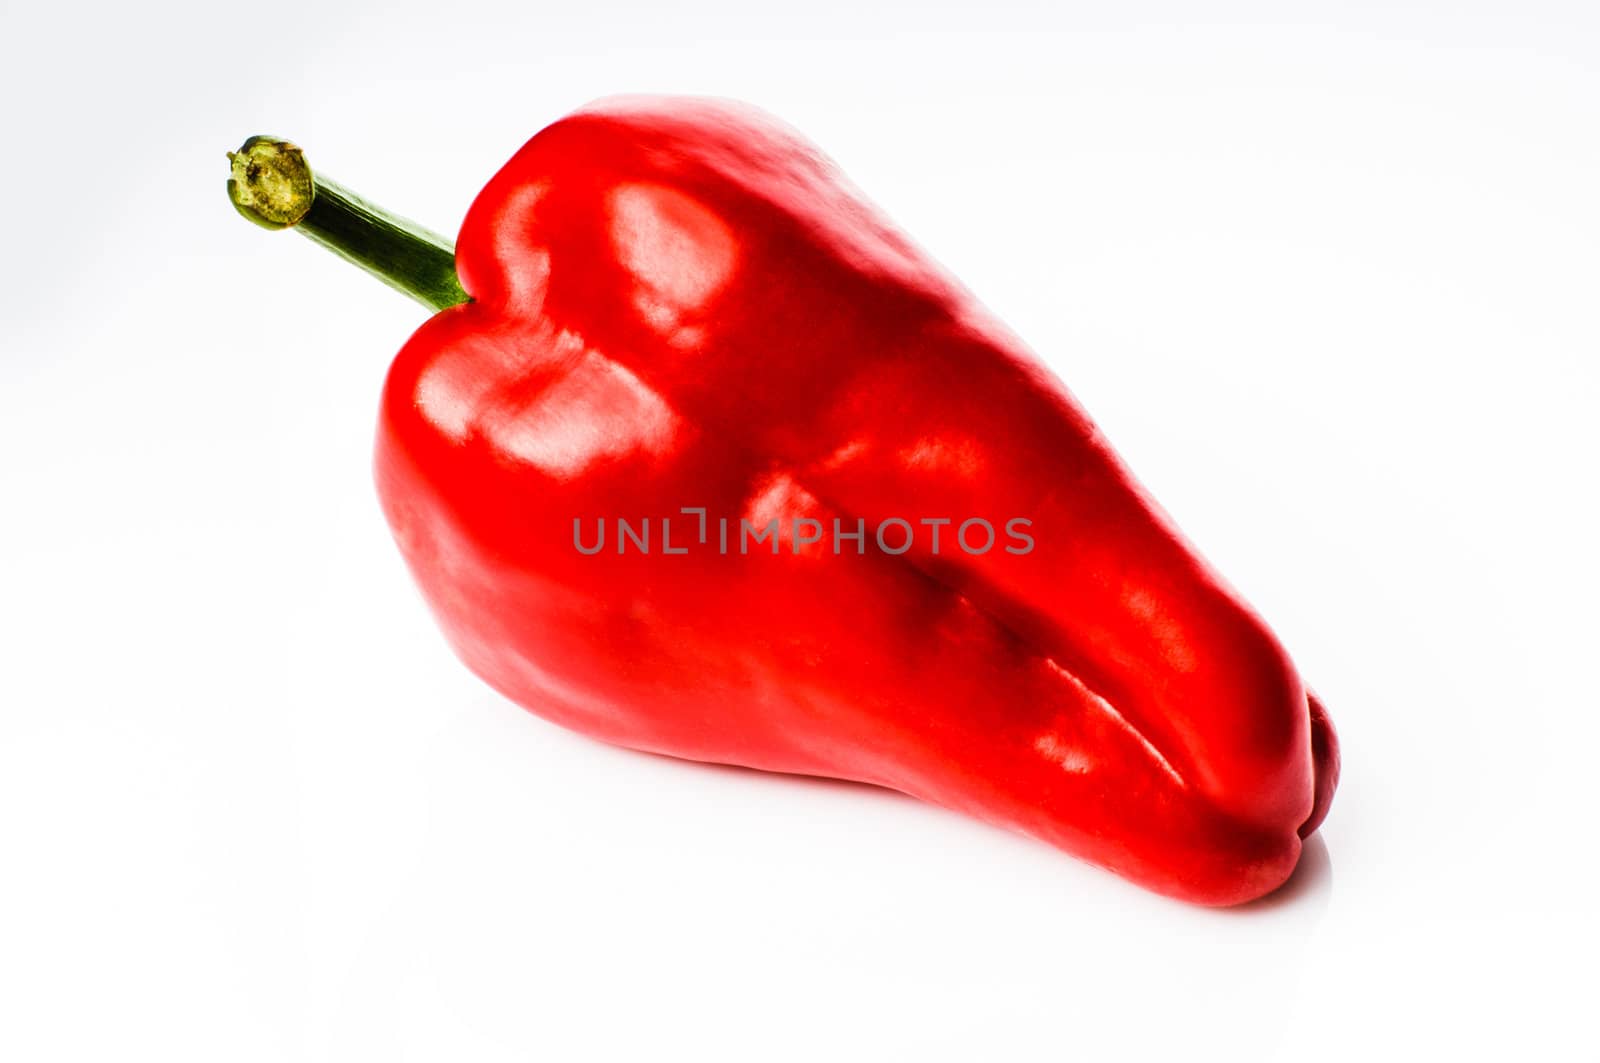 Big red pepper isolated on white background